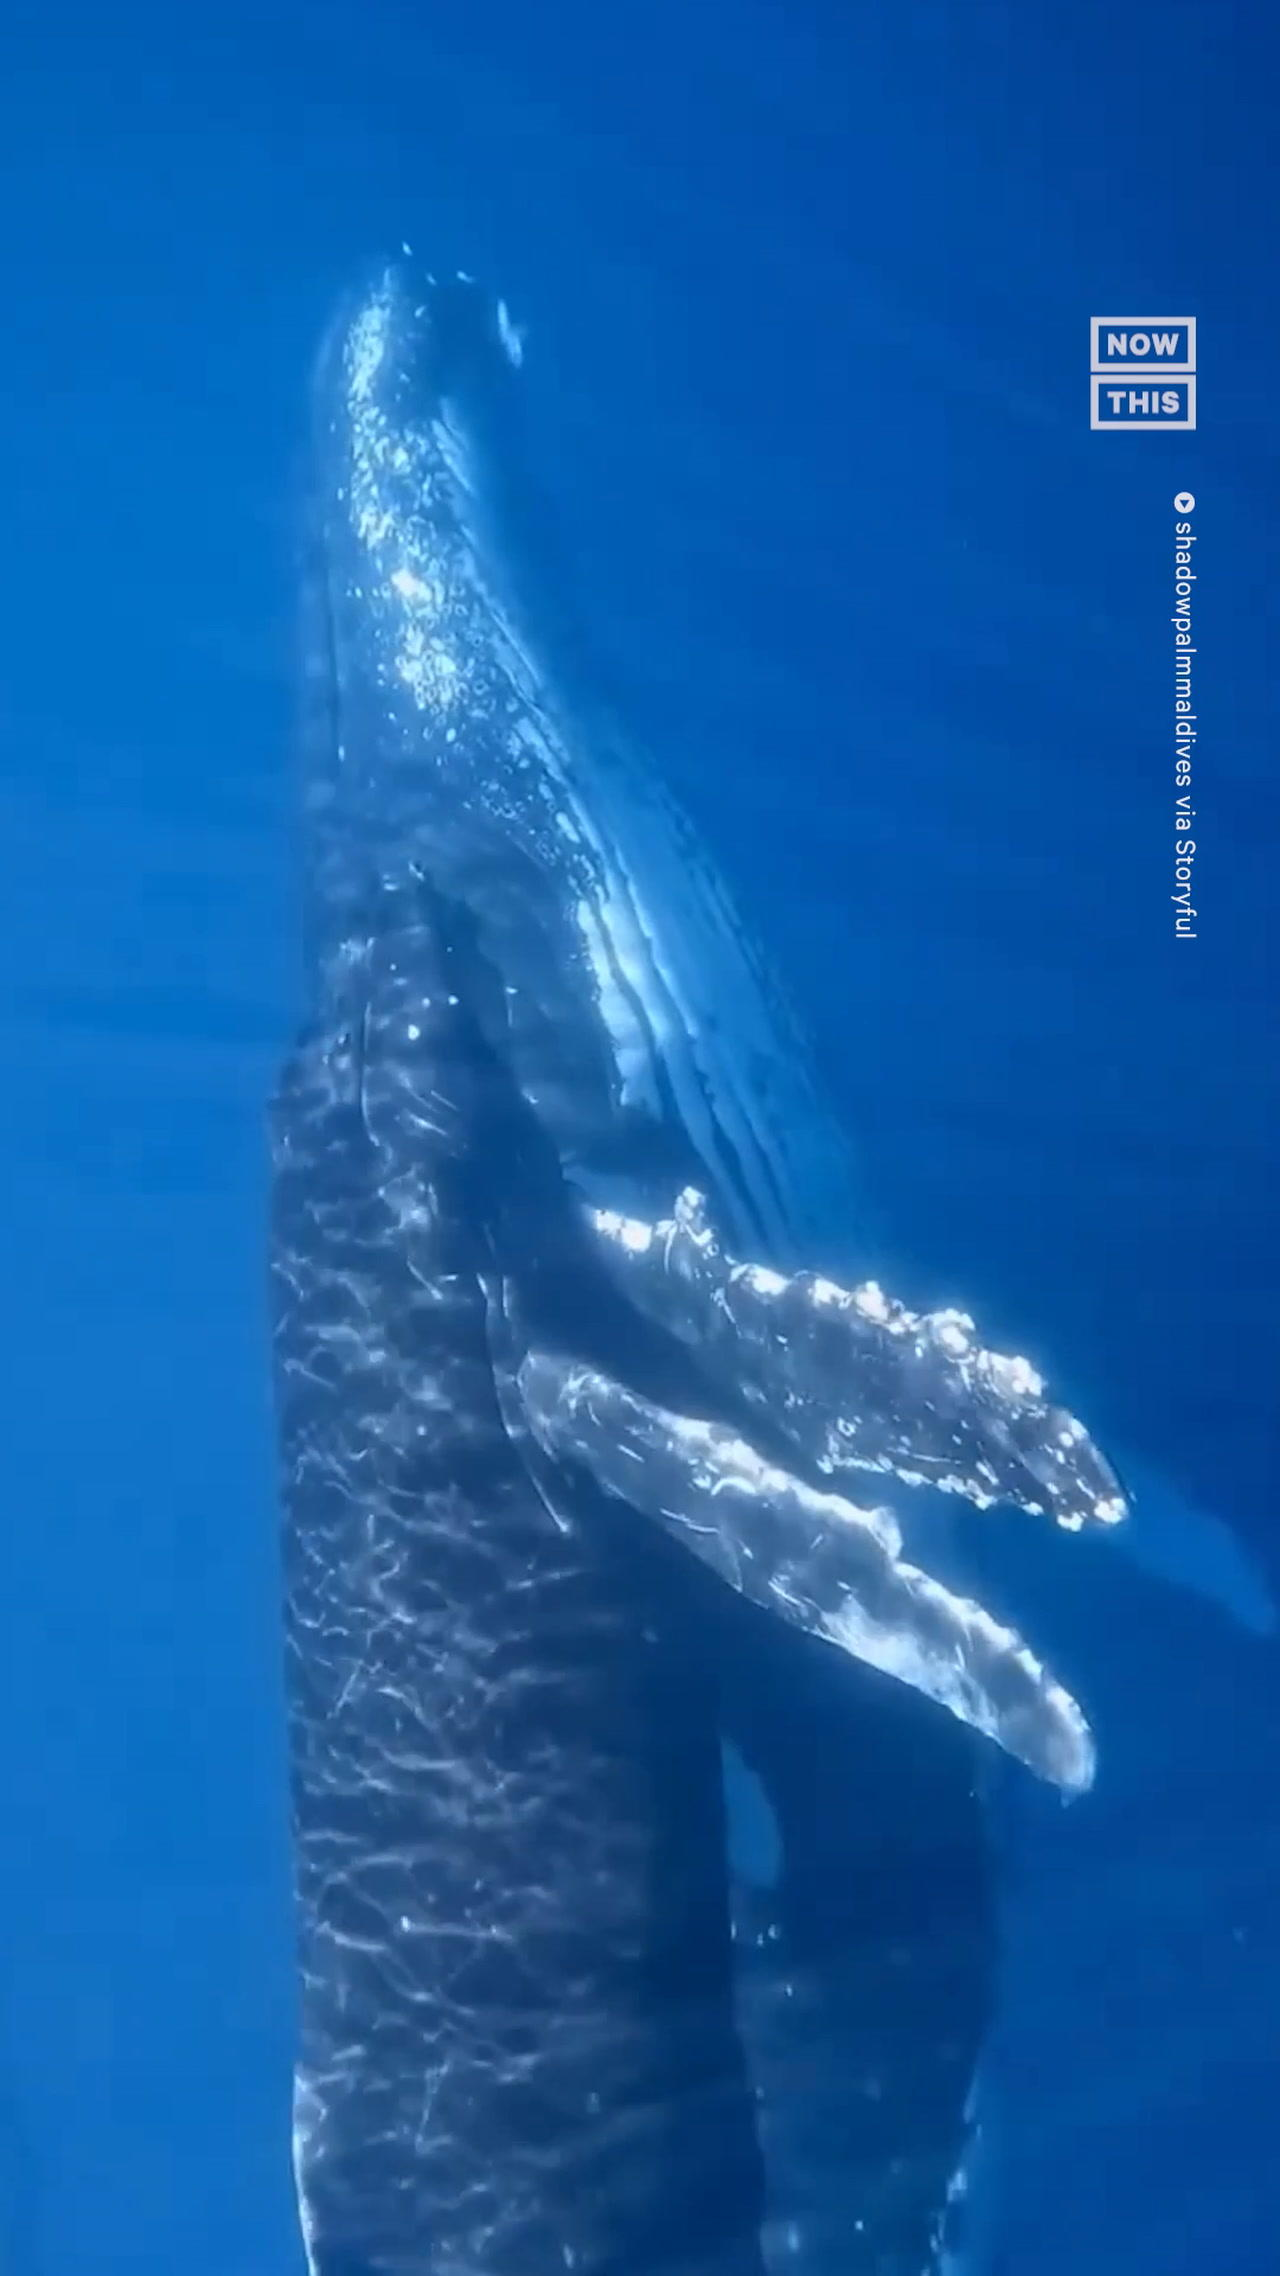 Snorkelers Have Incredible Encounter With Whale & Her Calf